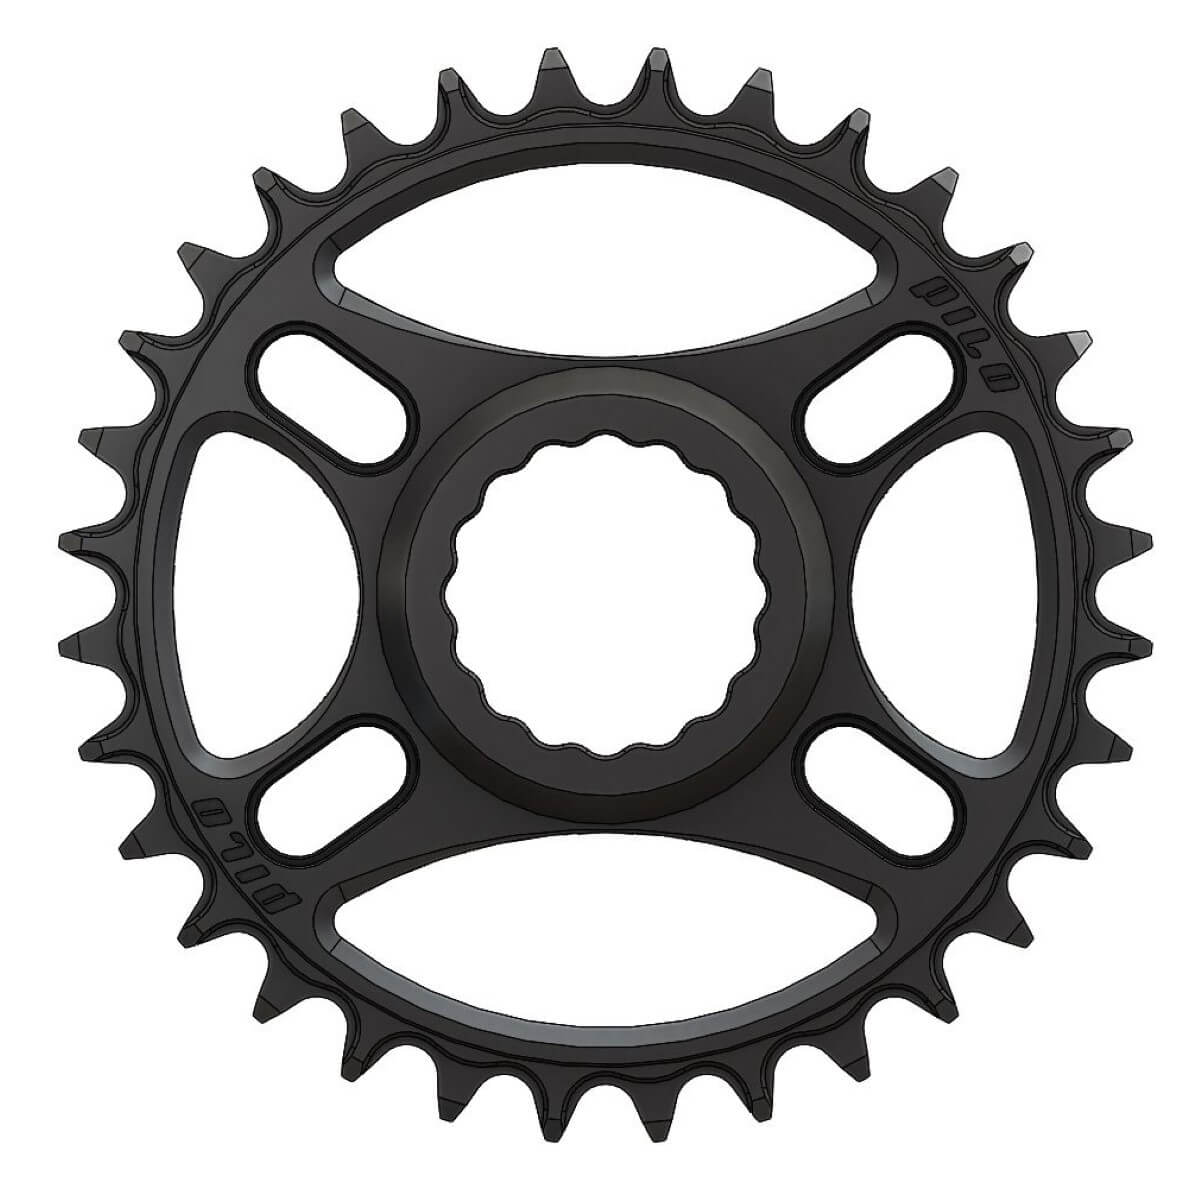 Pilo C51 Chainring Narrow Wide 32T for Race Face direct Hyperglide+ Compatible